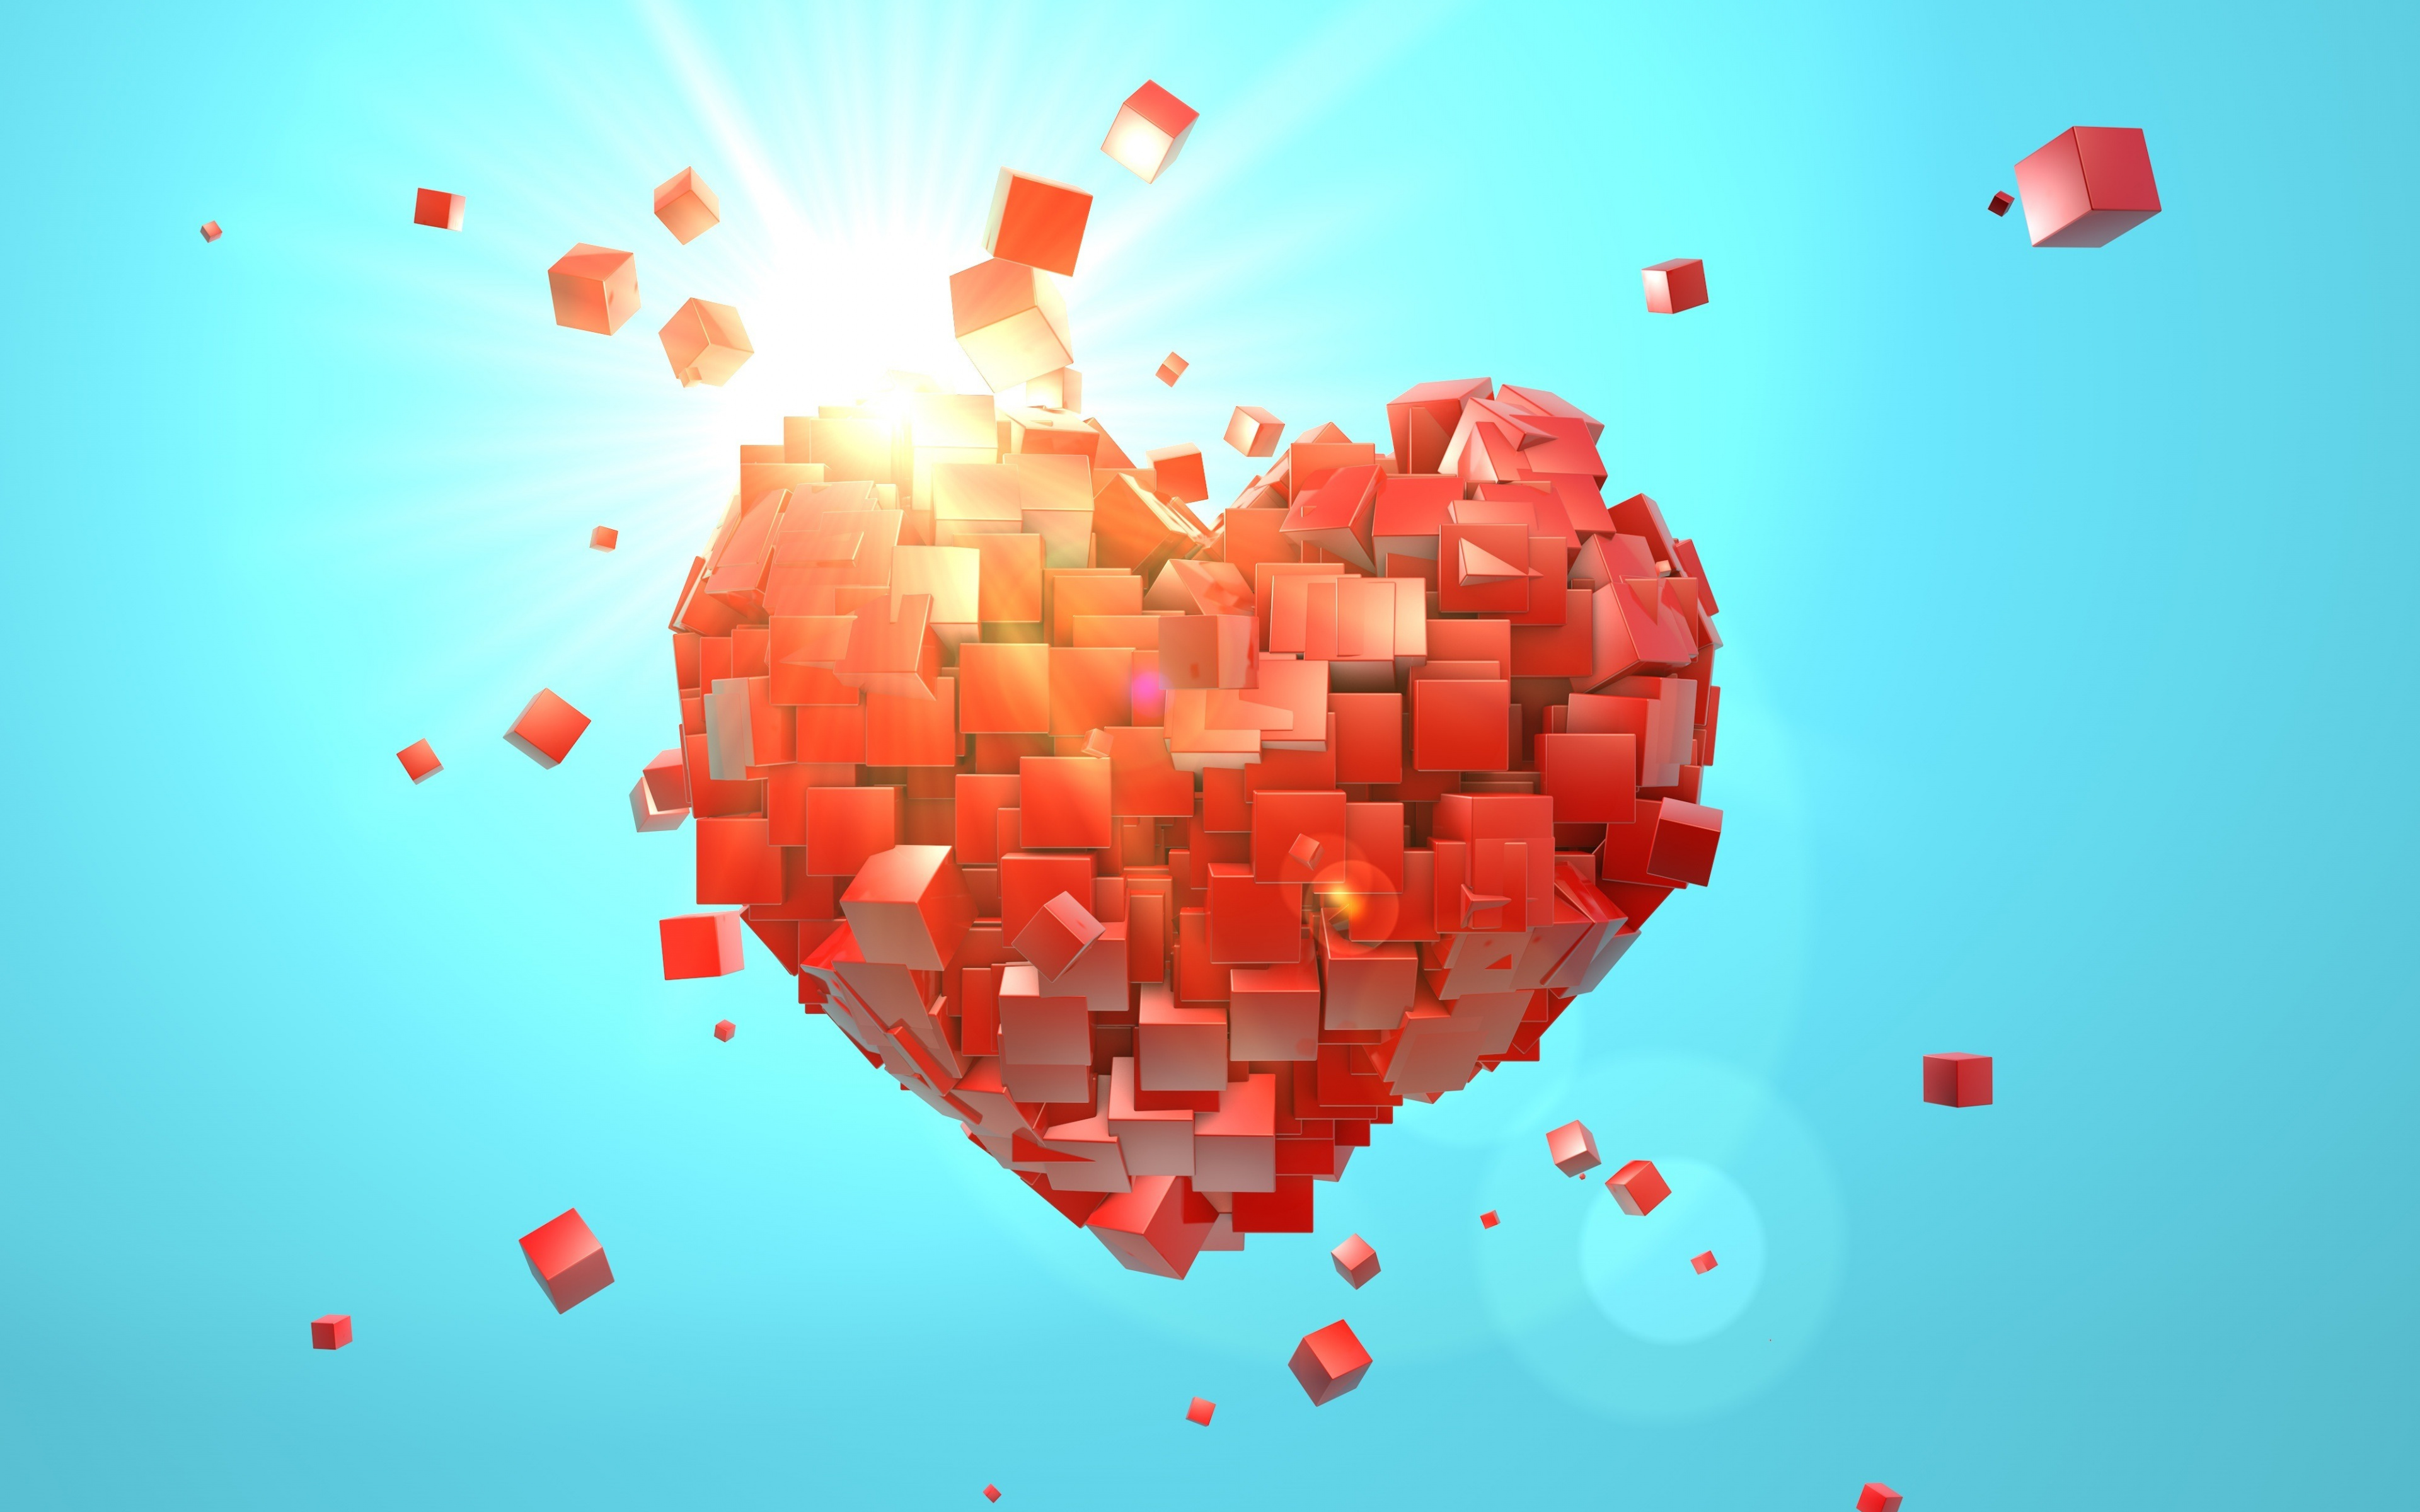 Download wallpaper 3840x2400 heart explosion, love, red cubes, abstract, valentine day 4k wallaper, 4k ultra HD 16:10 wallpaper, 3840x2400 HD background, 1568